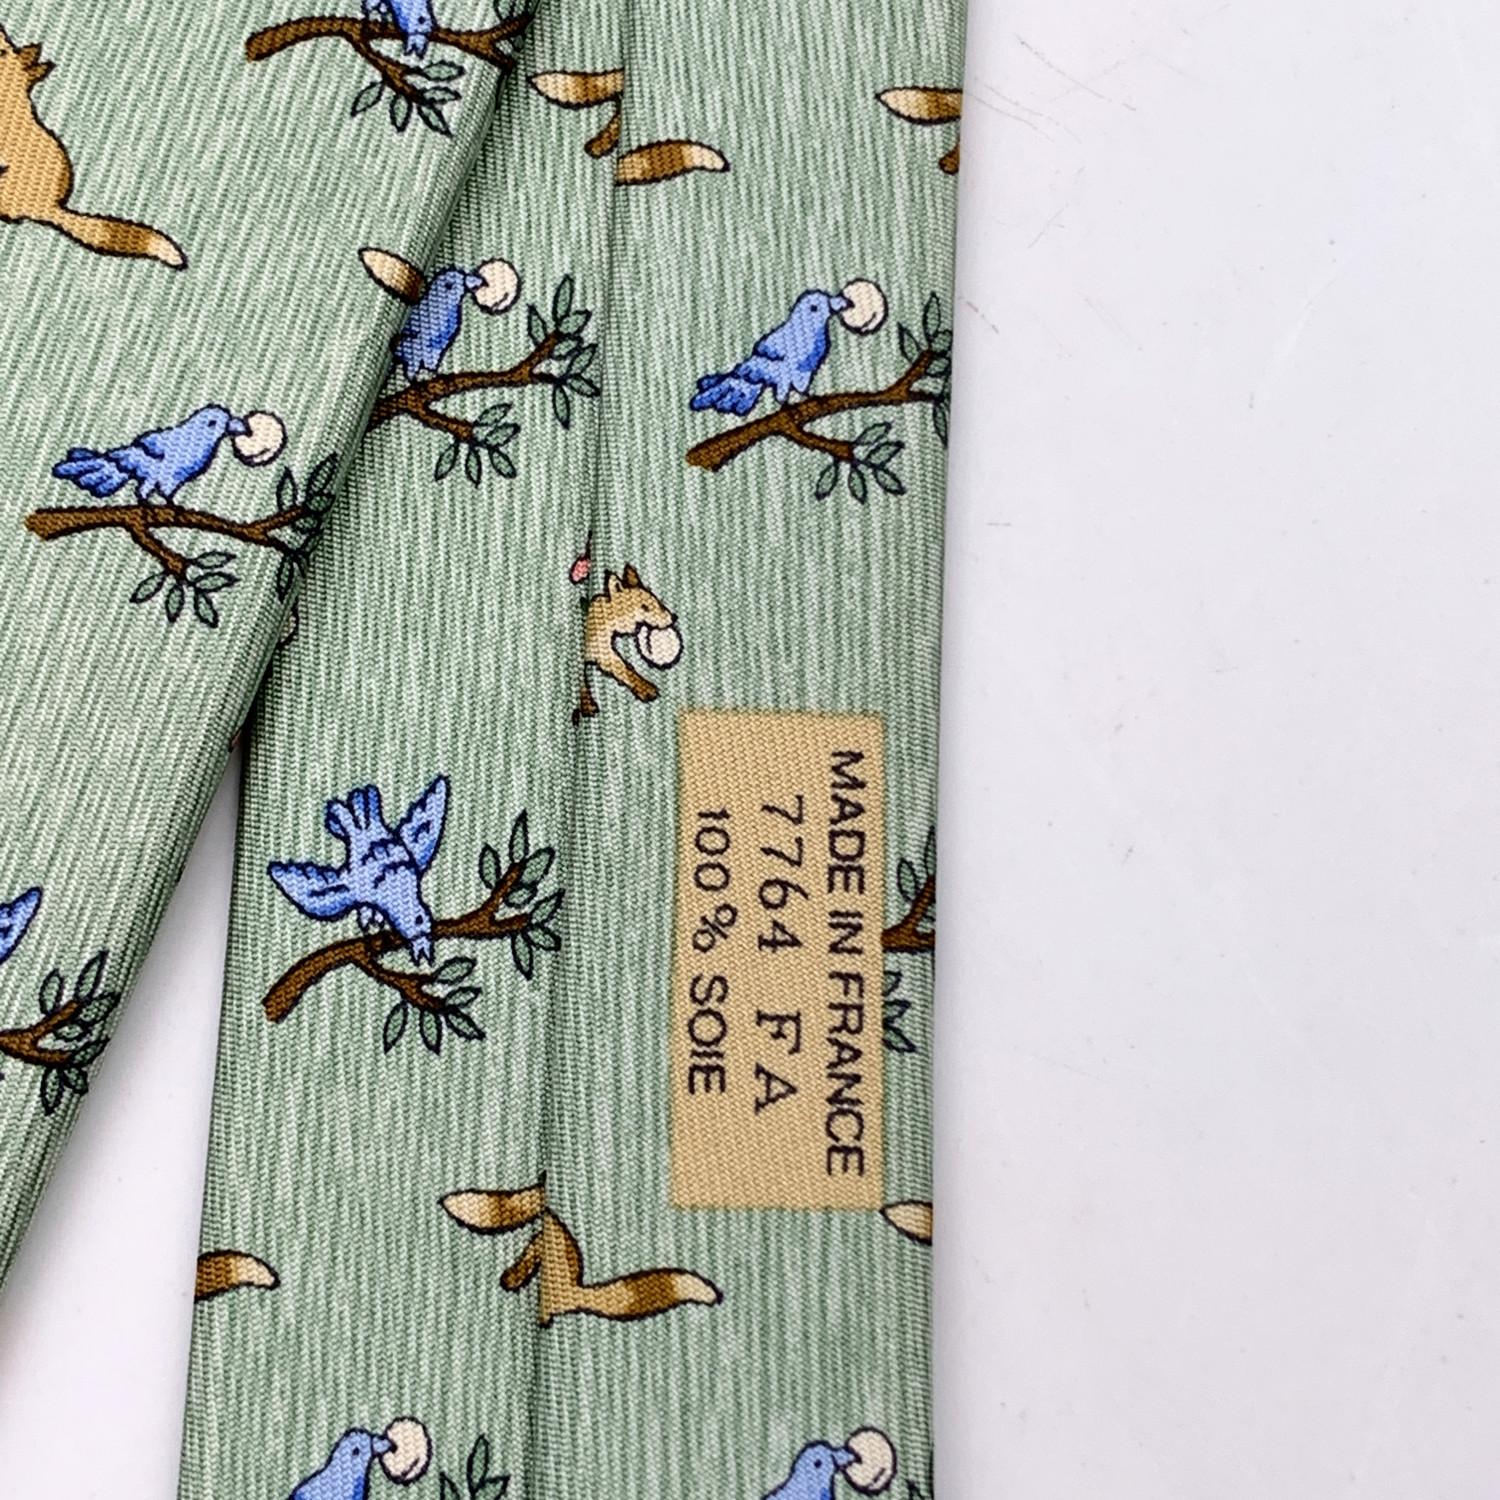 Elegant Hermes Neck Tie, 7764 FA, in light green color with 'The Fox and the Stork' fable print. Composition: 100% Silk. Hermes composition tag attached. 'HERMES Paris' with copyright symbol printed on the back. Made in France. Total length: 57